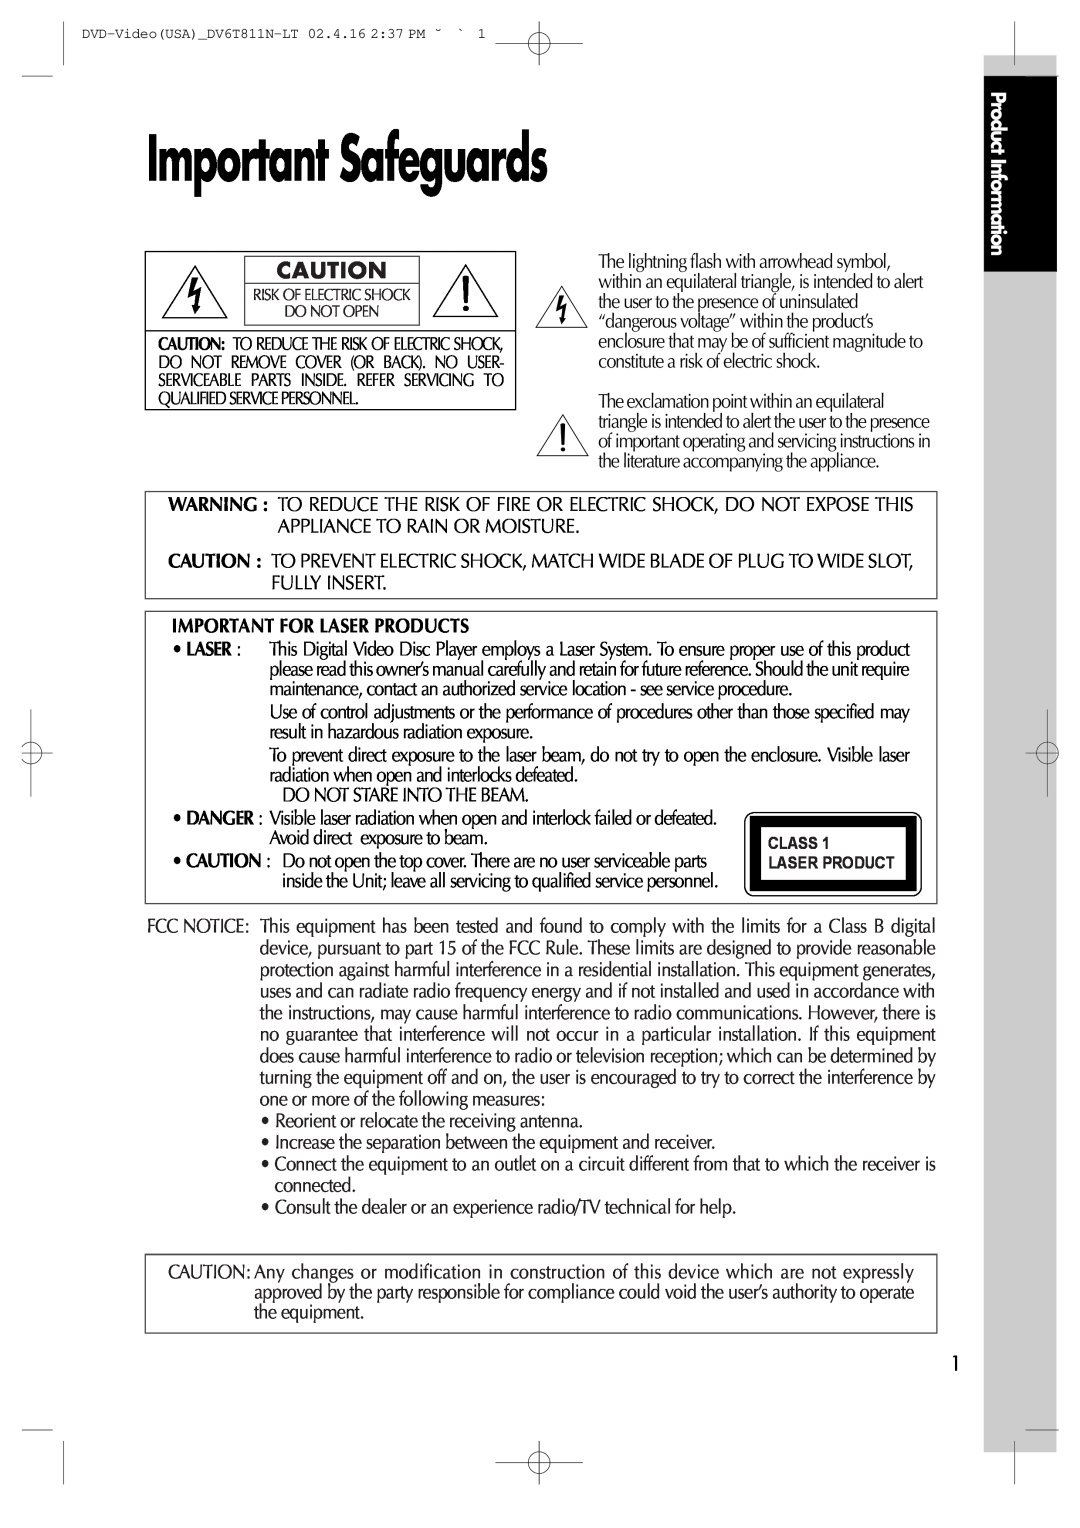 Daewoo DV6T811N owner manual Important Safeguards, Important For Laser Products, Avoid direct exposure to beam 